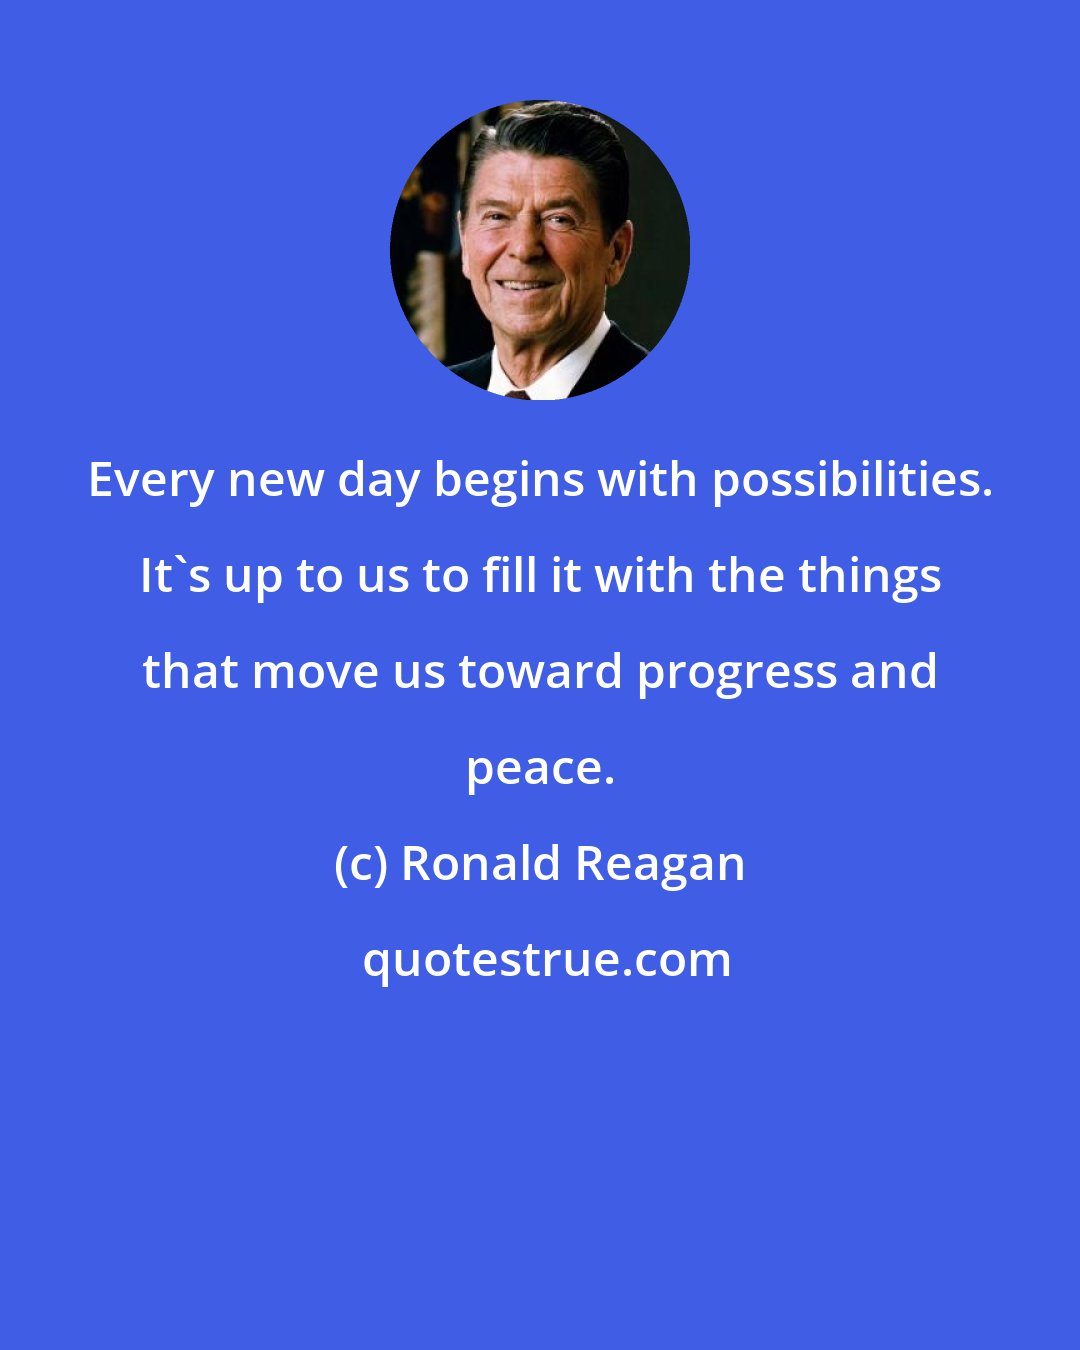 Ronald Reagan: Every new day begins with possibilities. It's up to us to fill it with the things that move us toward progress and peace.